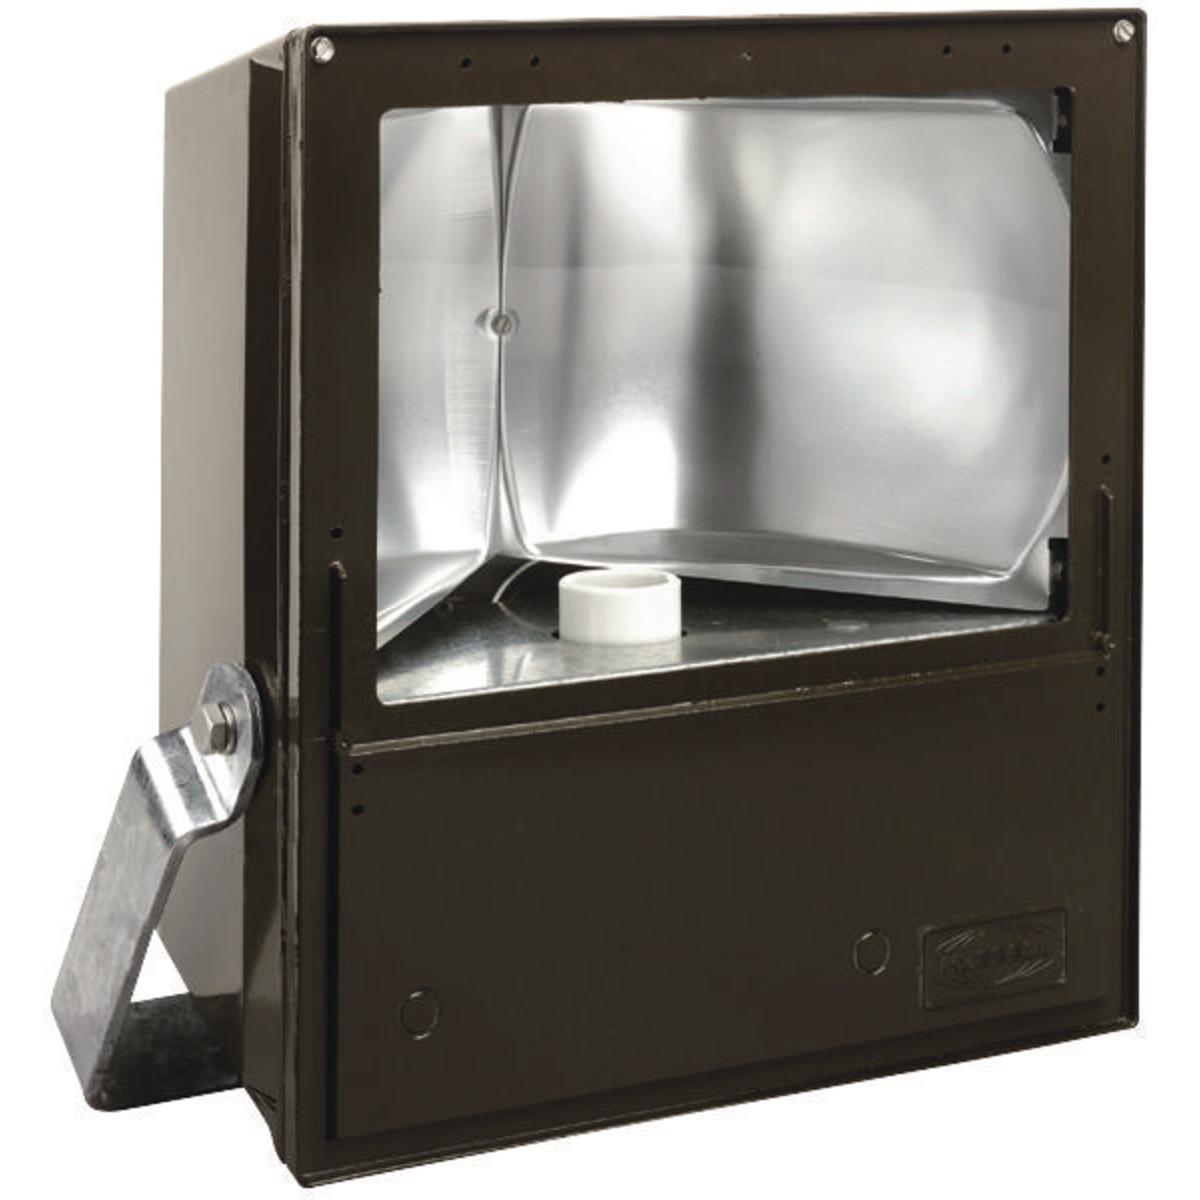 Hubbell KFP355-76 KF Series - Aluminum 350 Watt Pulse Start Metal Halide Floodlight (Lamp Not Included) - 480V At 60Hz  ; Rugged weathertight housing of copperfree aluminum with corrosion resistant bronze finish ; Wide beam distribution ; Thermal shock, impact-resistant le